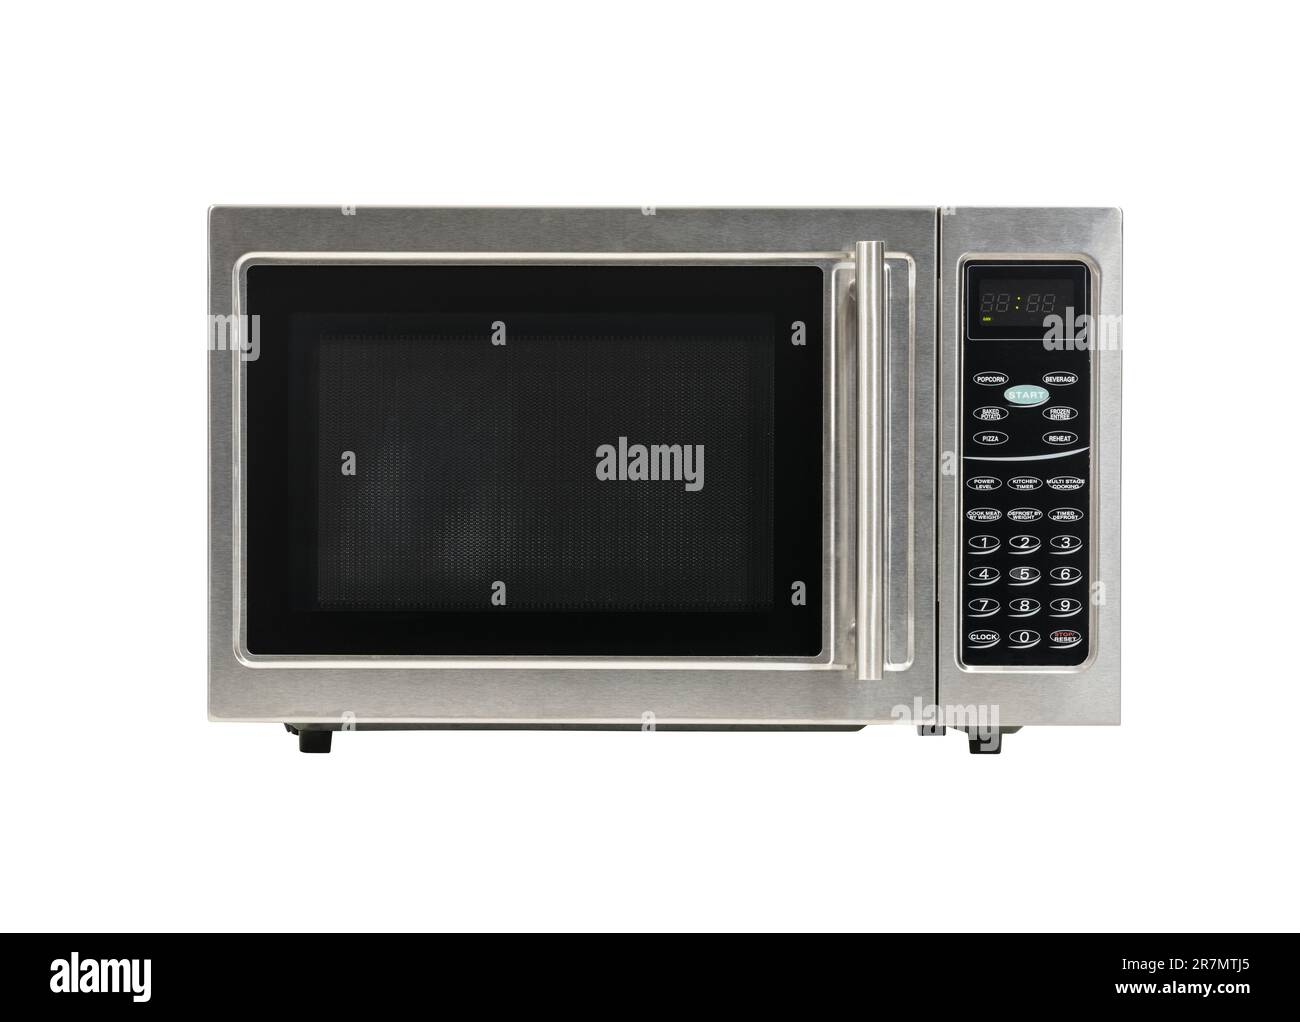 https://c8.alamy.com/comp/2R7MTJ5/old-microwave-oven-isolated-with-cut-out-background-2R7MTJ5.jpg